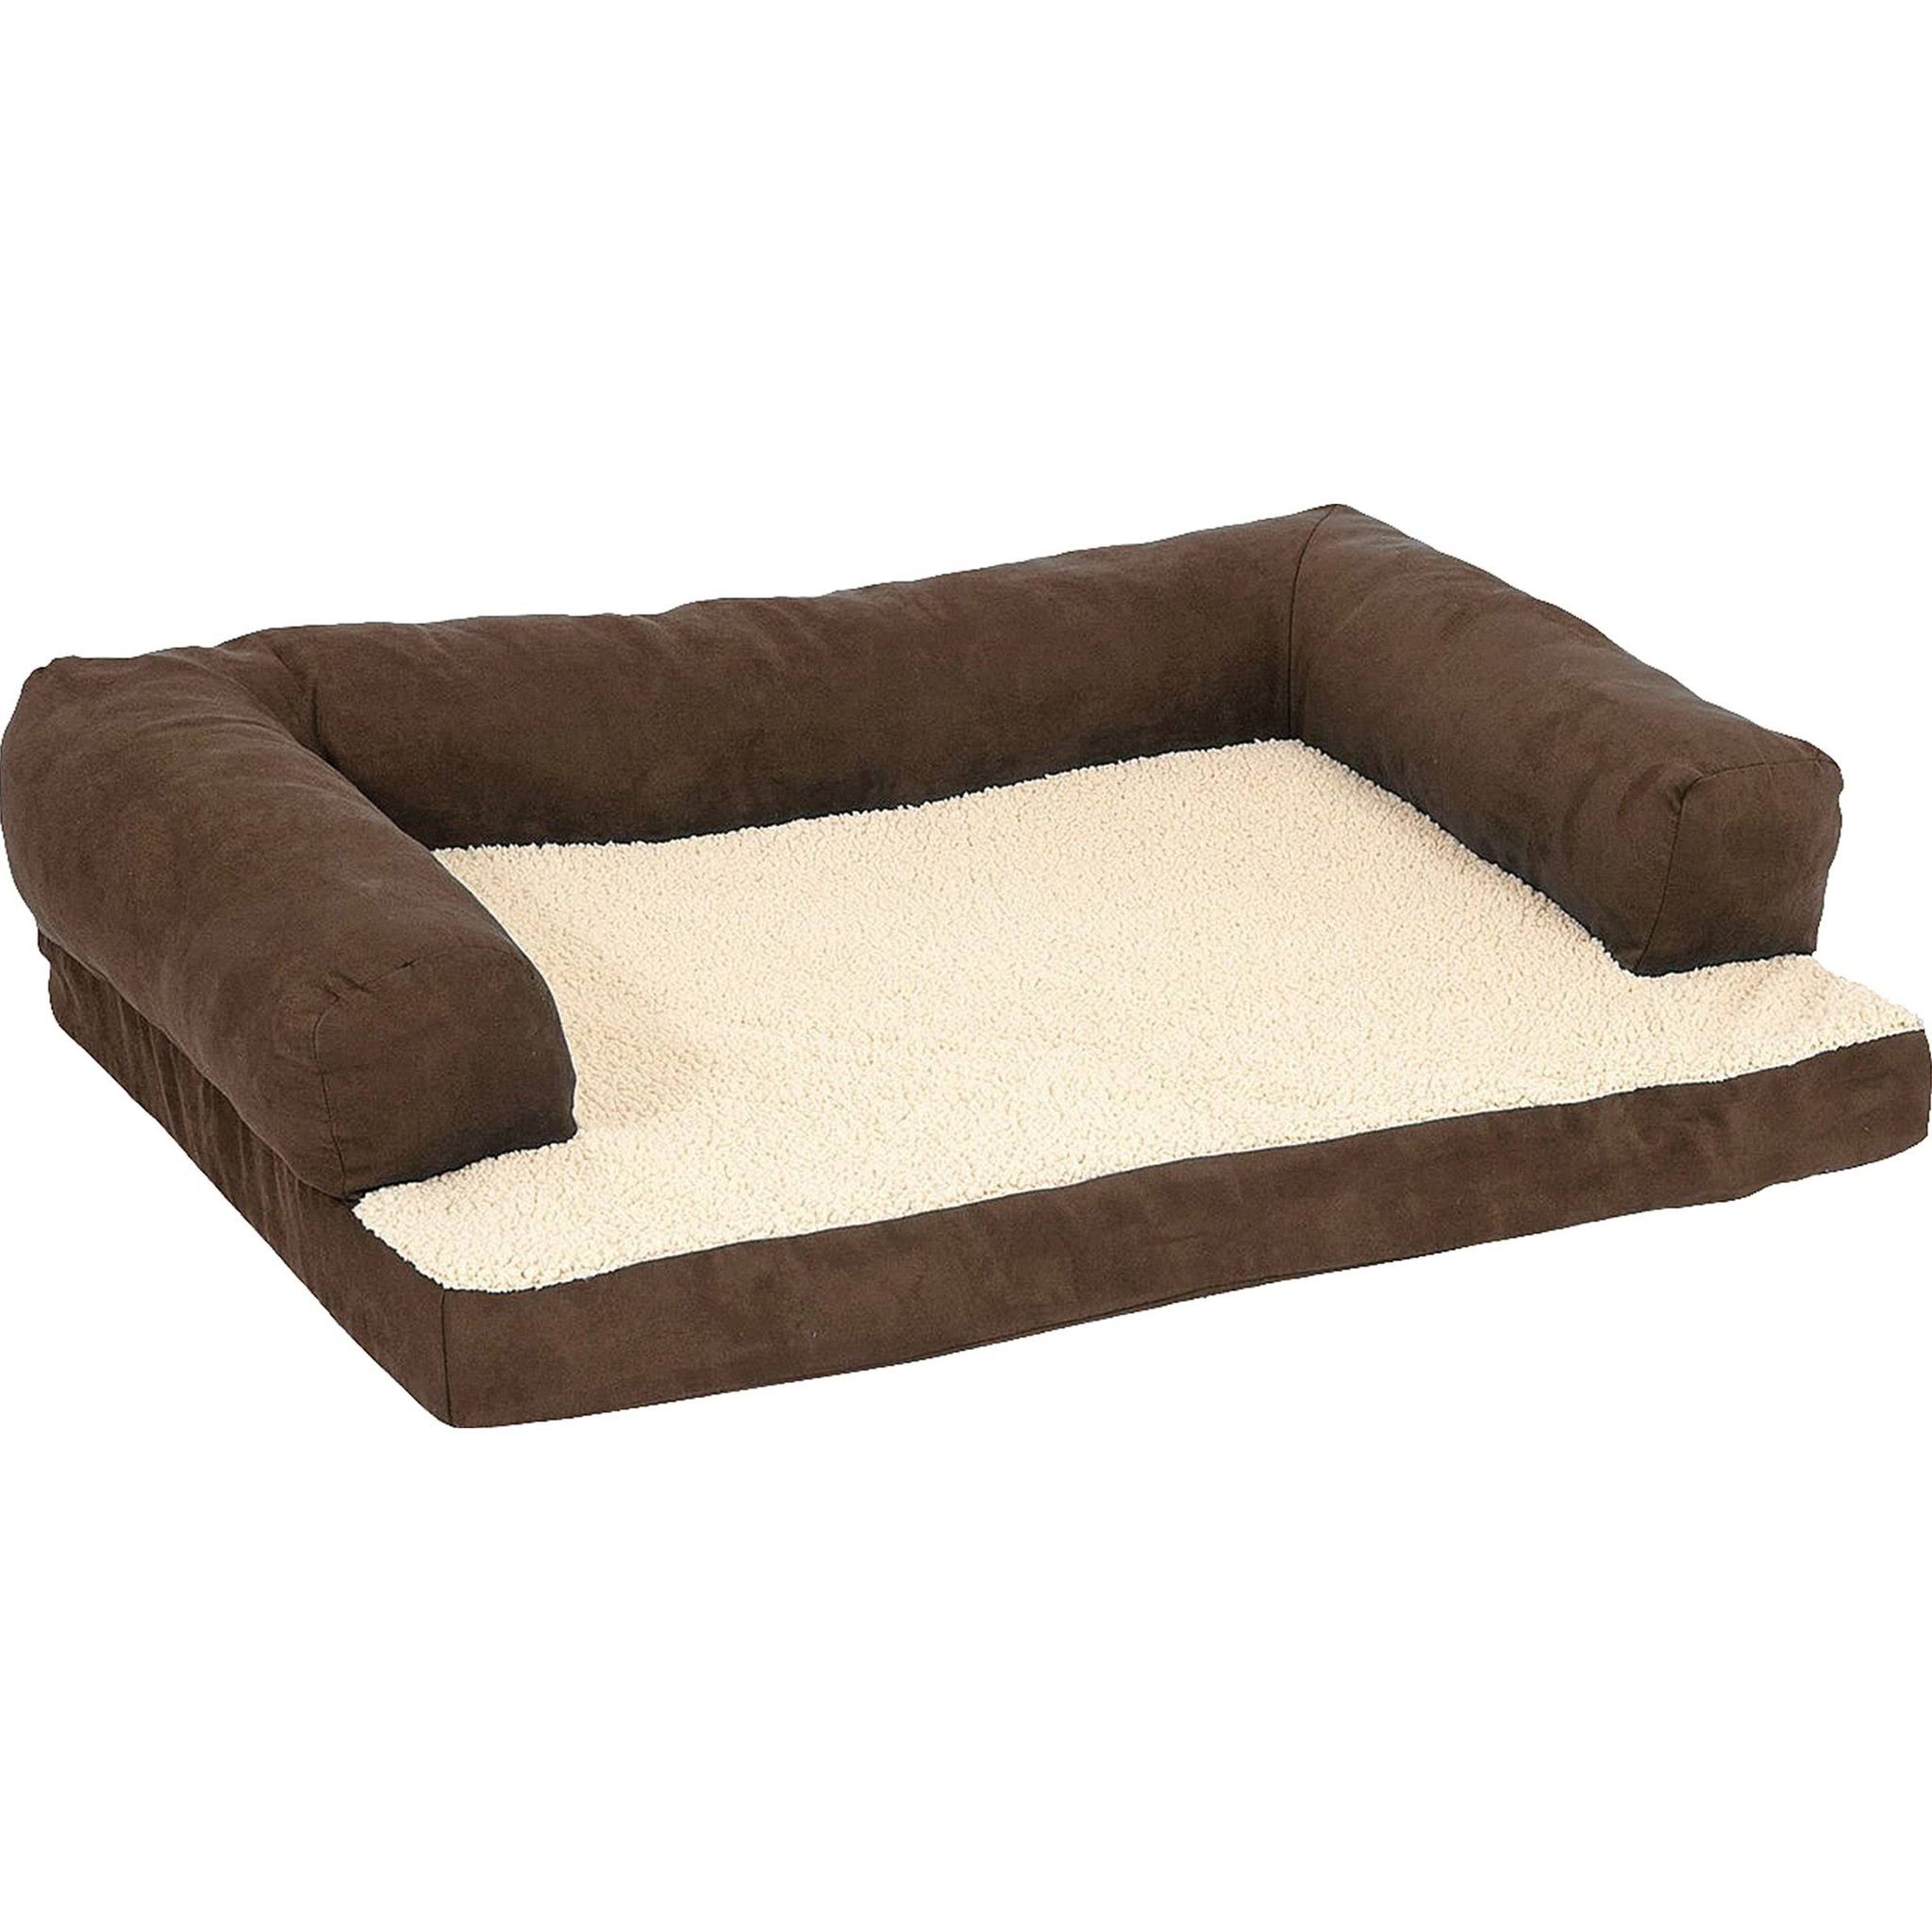 Petmate Bolstered Ortho Bed - 35" X 25"